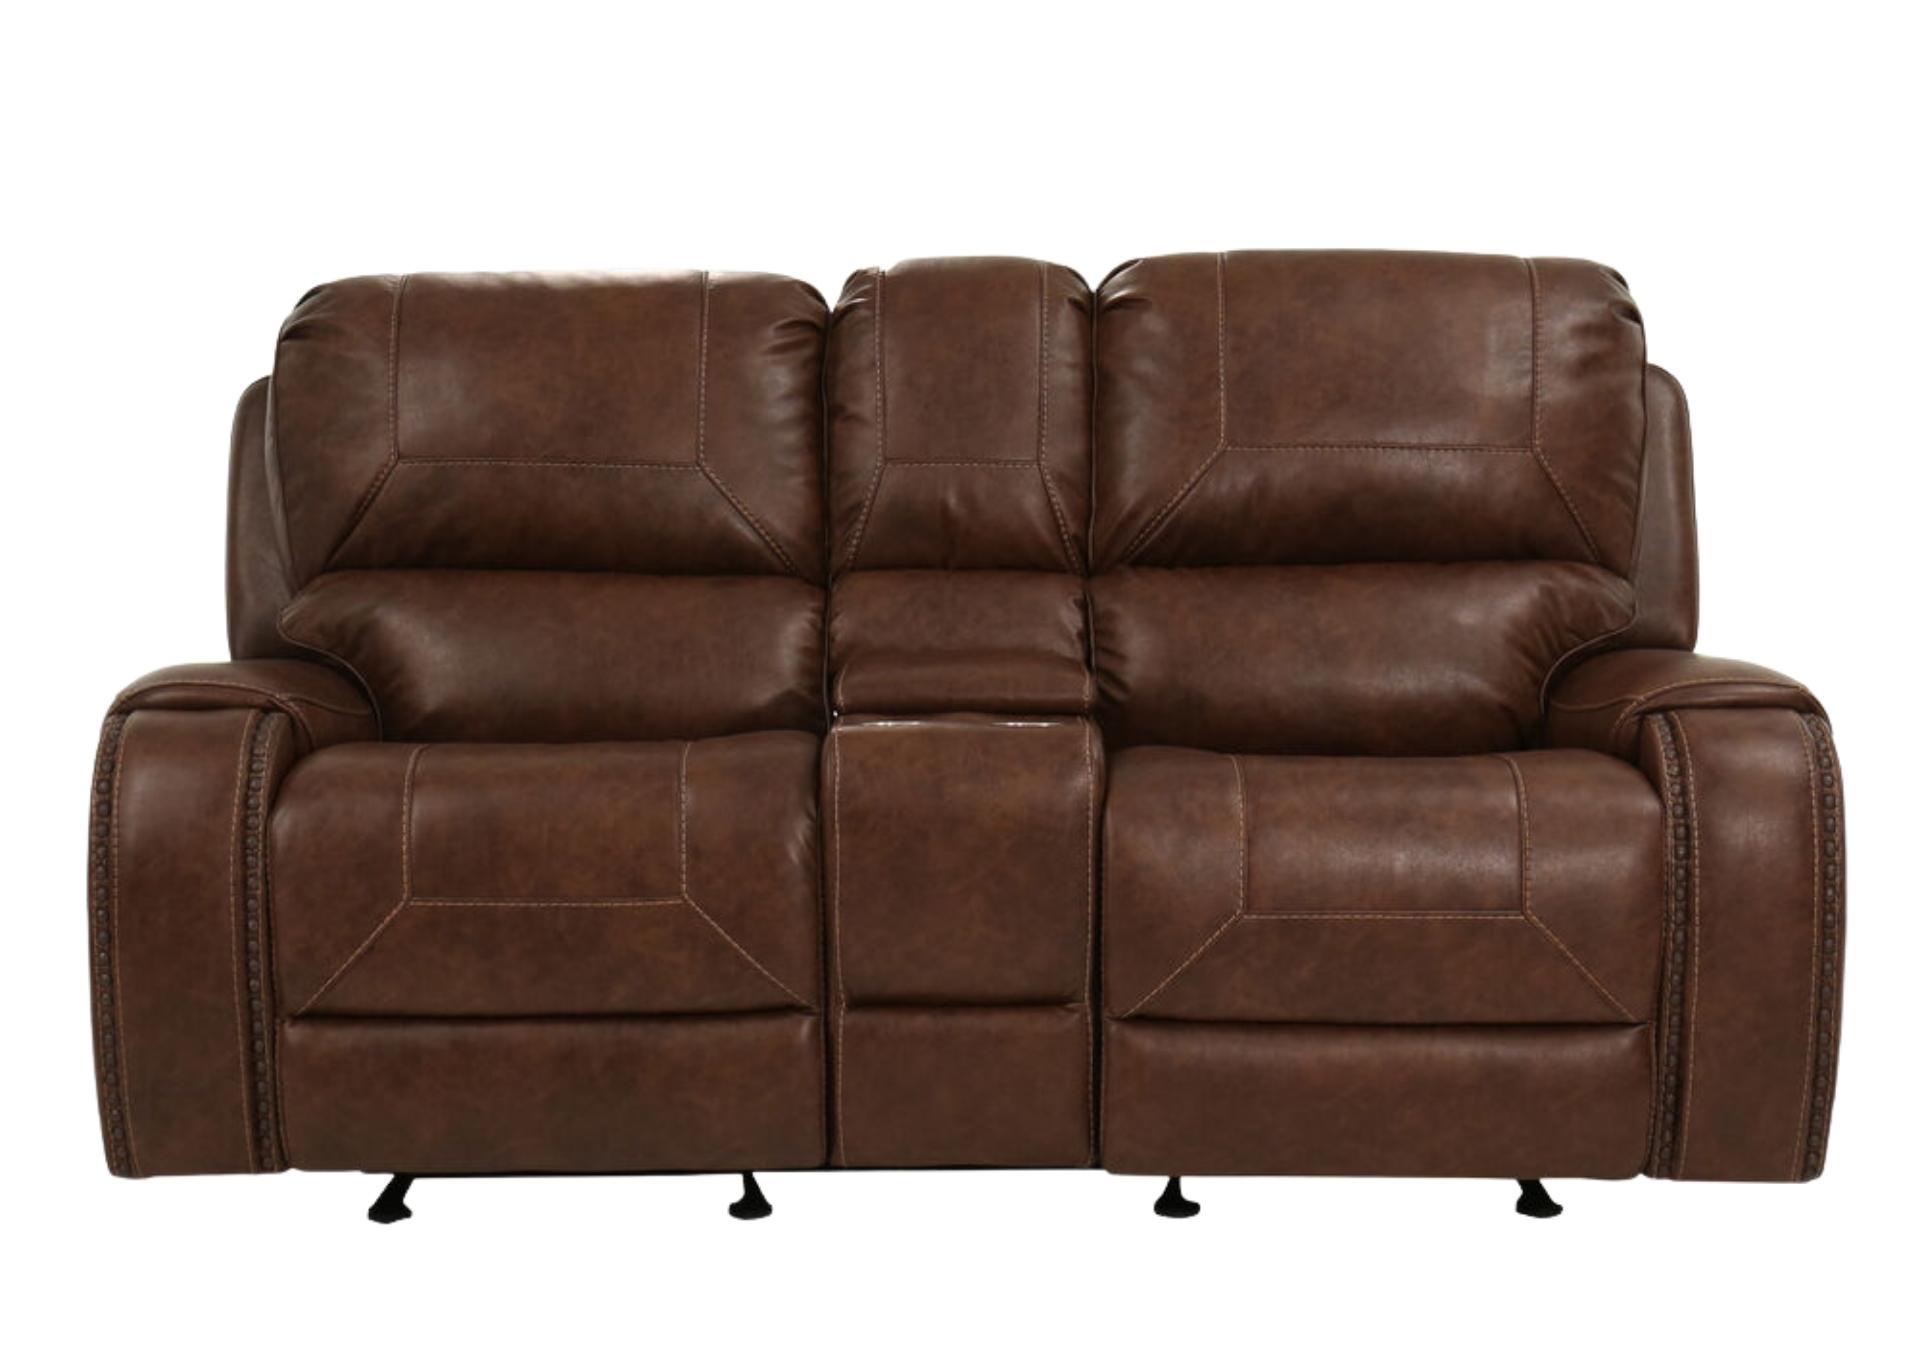 KEILY BROWN RECLINING LOVESEAT WITH CONSOLE